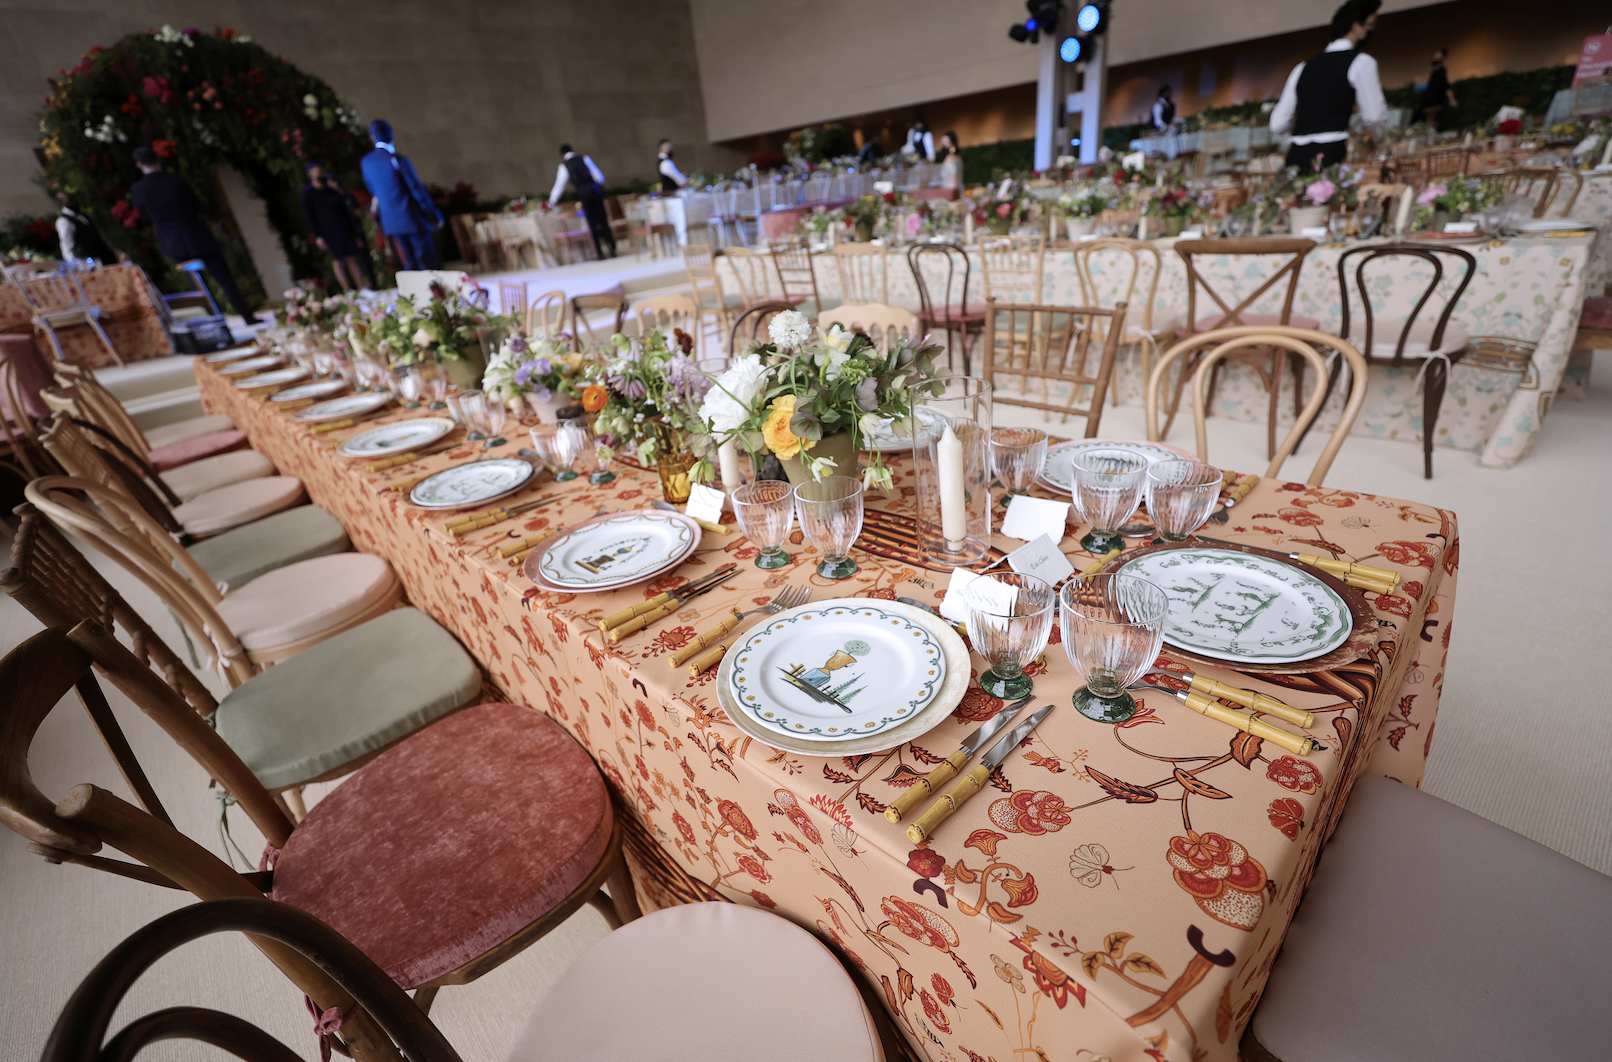 Chairs of various types and colors set at tables with fancy floral tablecloths